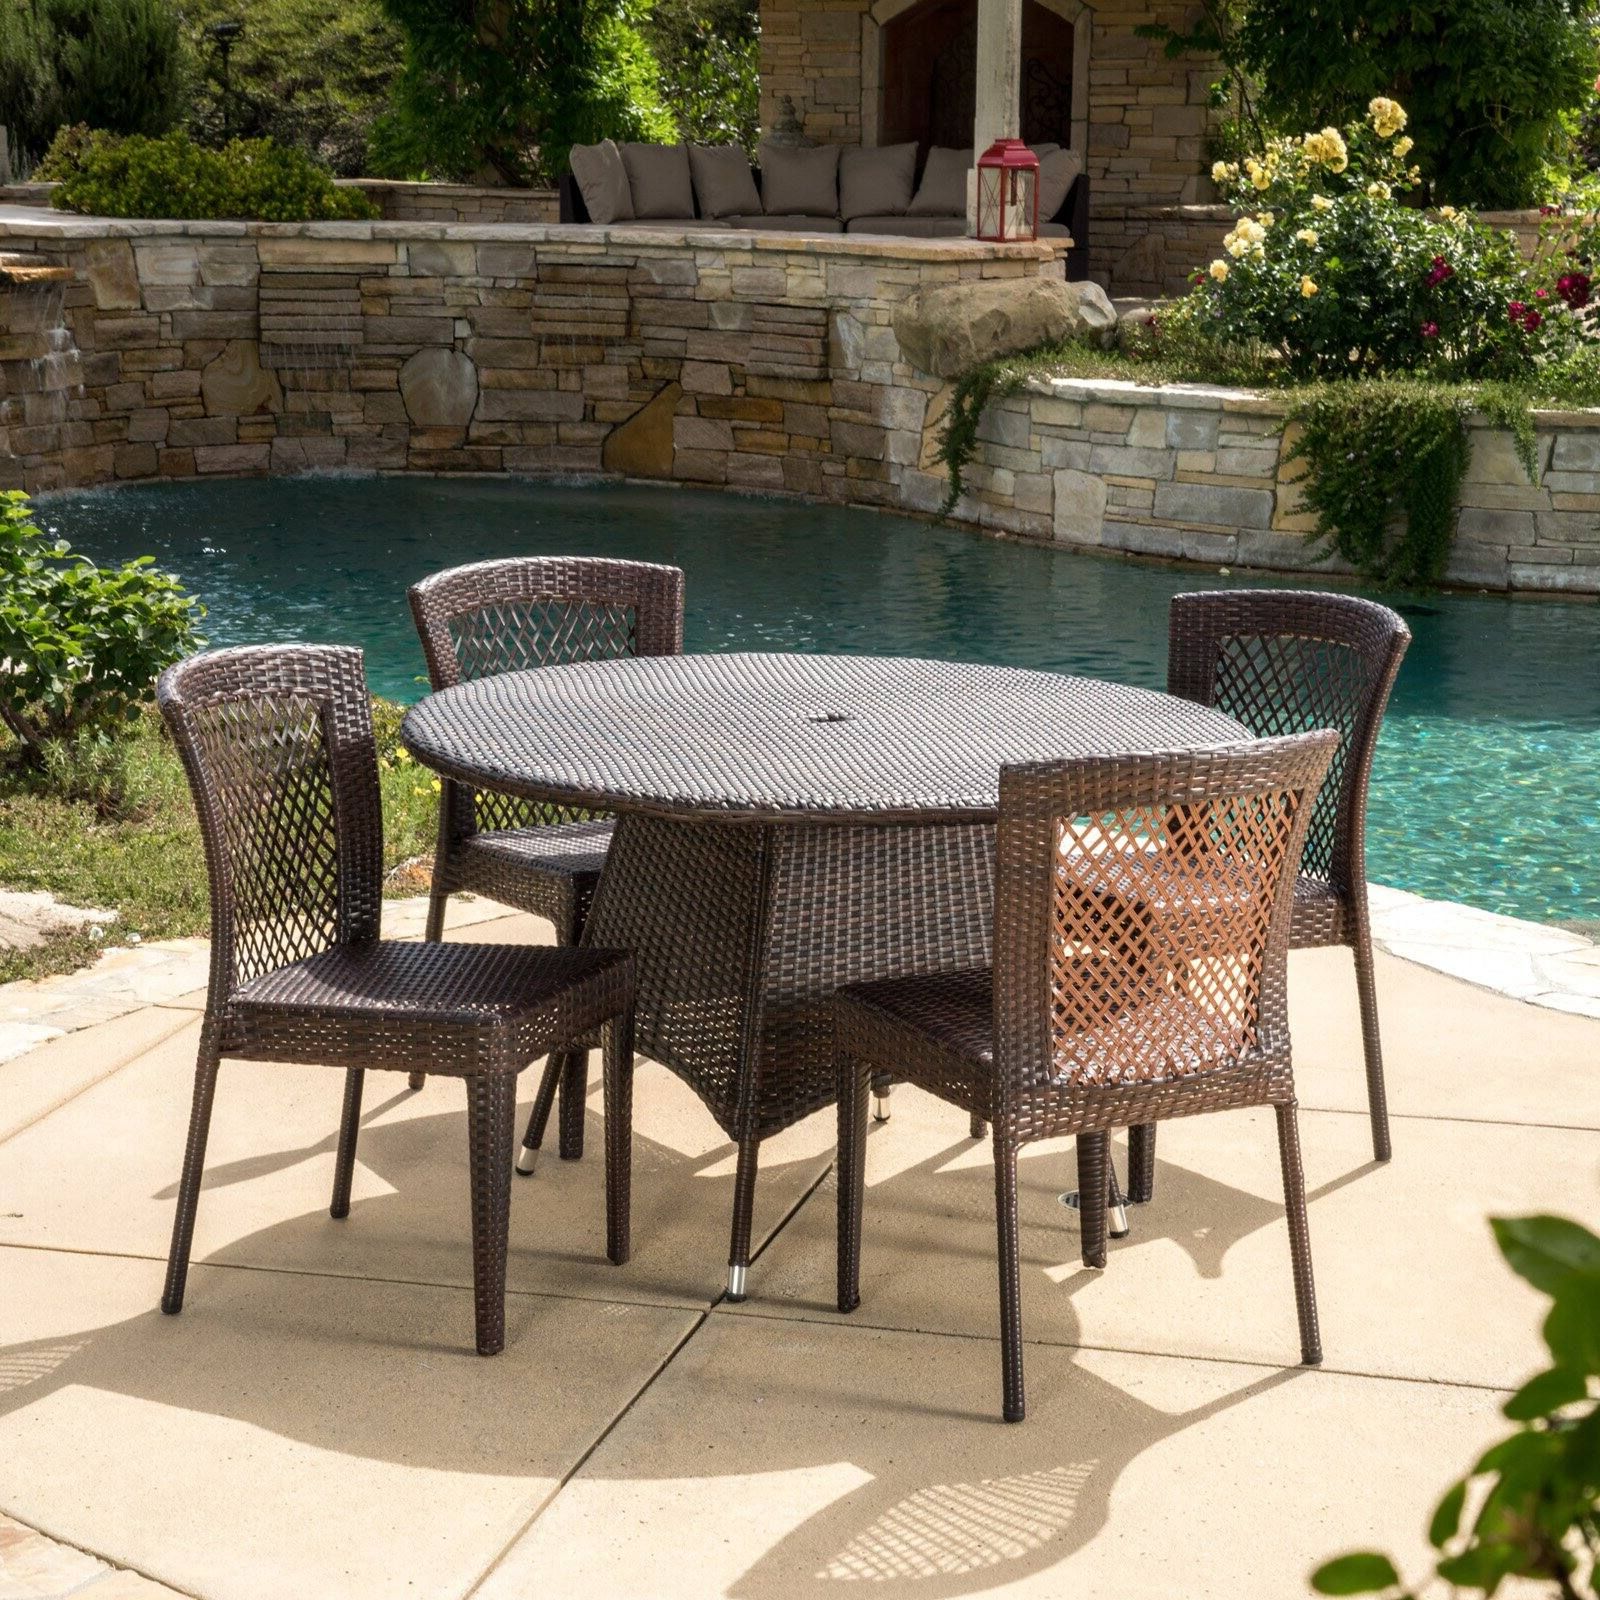 Celia Wicker 5 Piece Round Patio Dining Set – Brown – Walmart Intended For Fashionable 5 Piece Round Dining Sets (View 15 of 15)